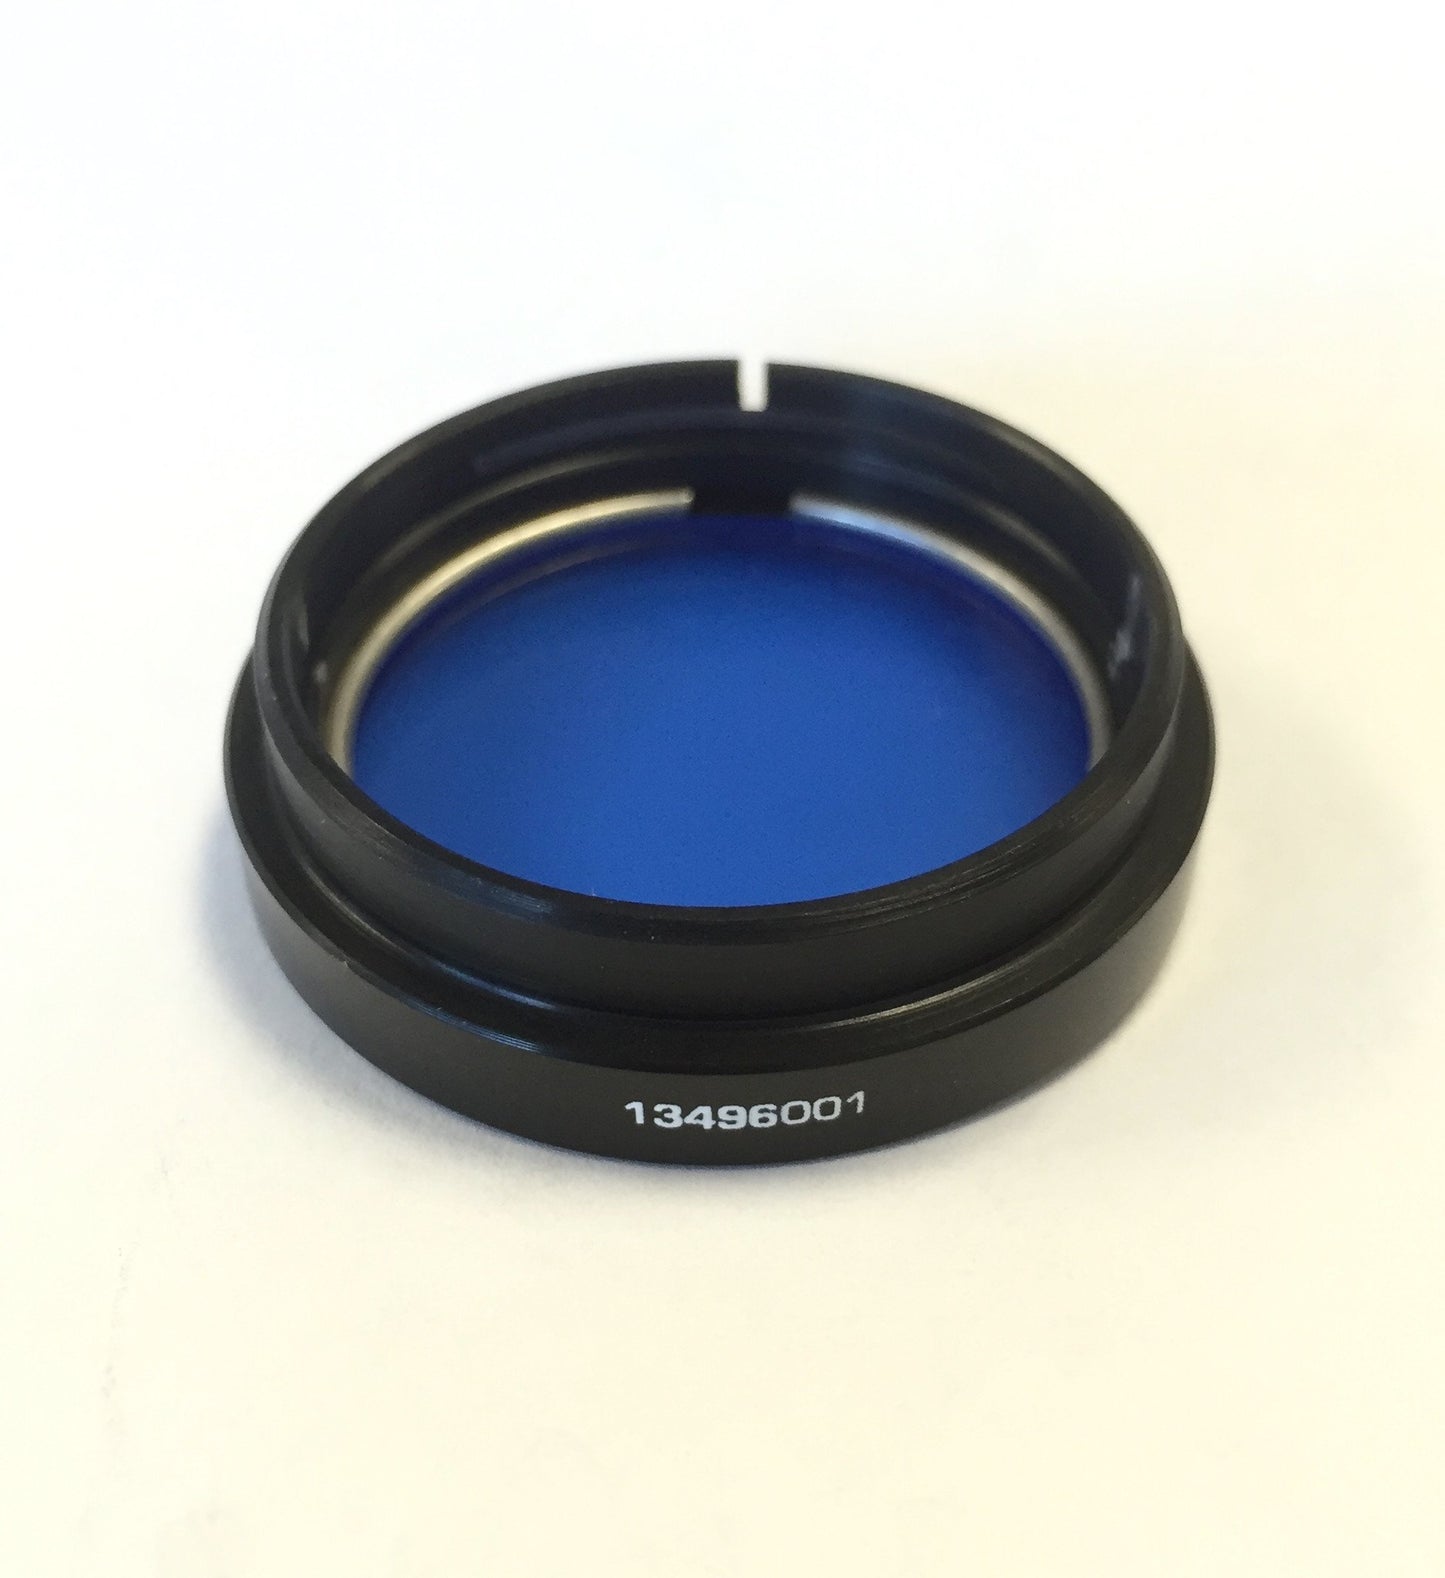 Leica CME Blue Filter - 13496001 - Microscope Central
 - 2